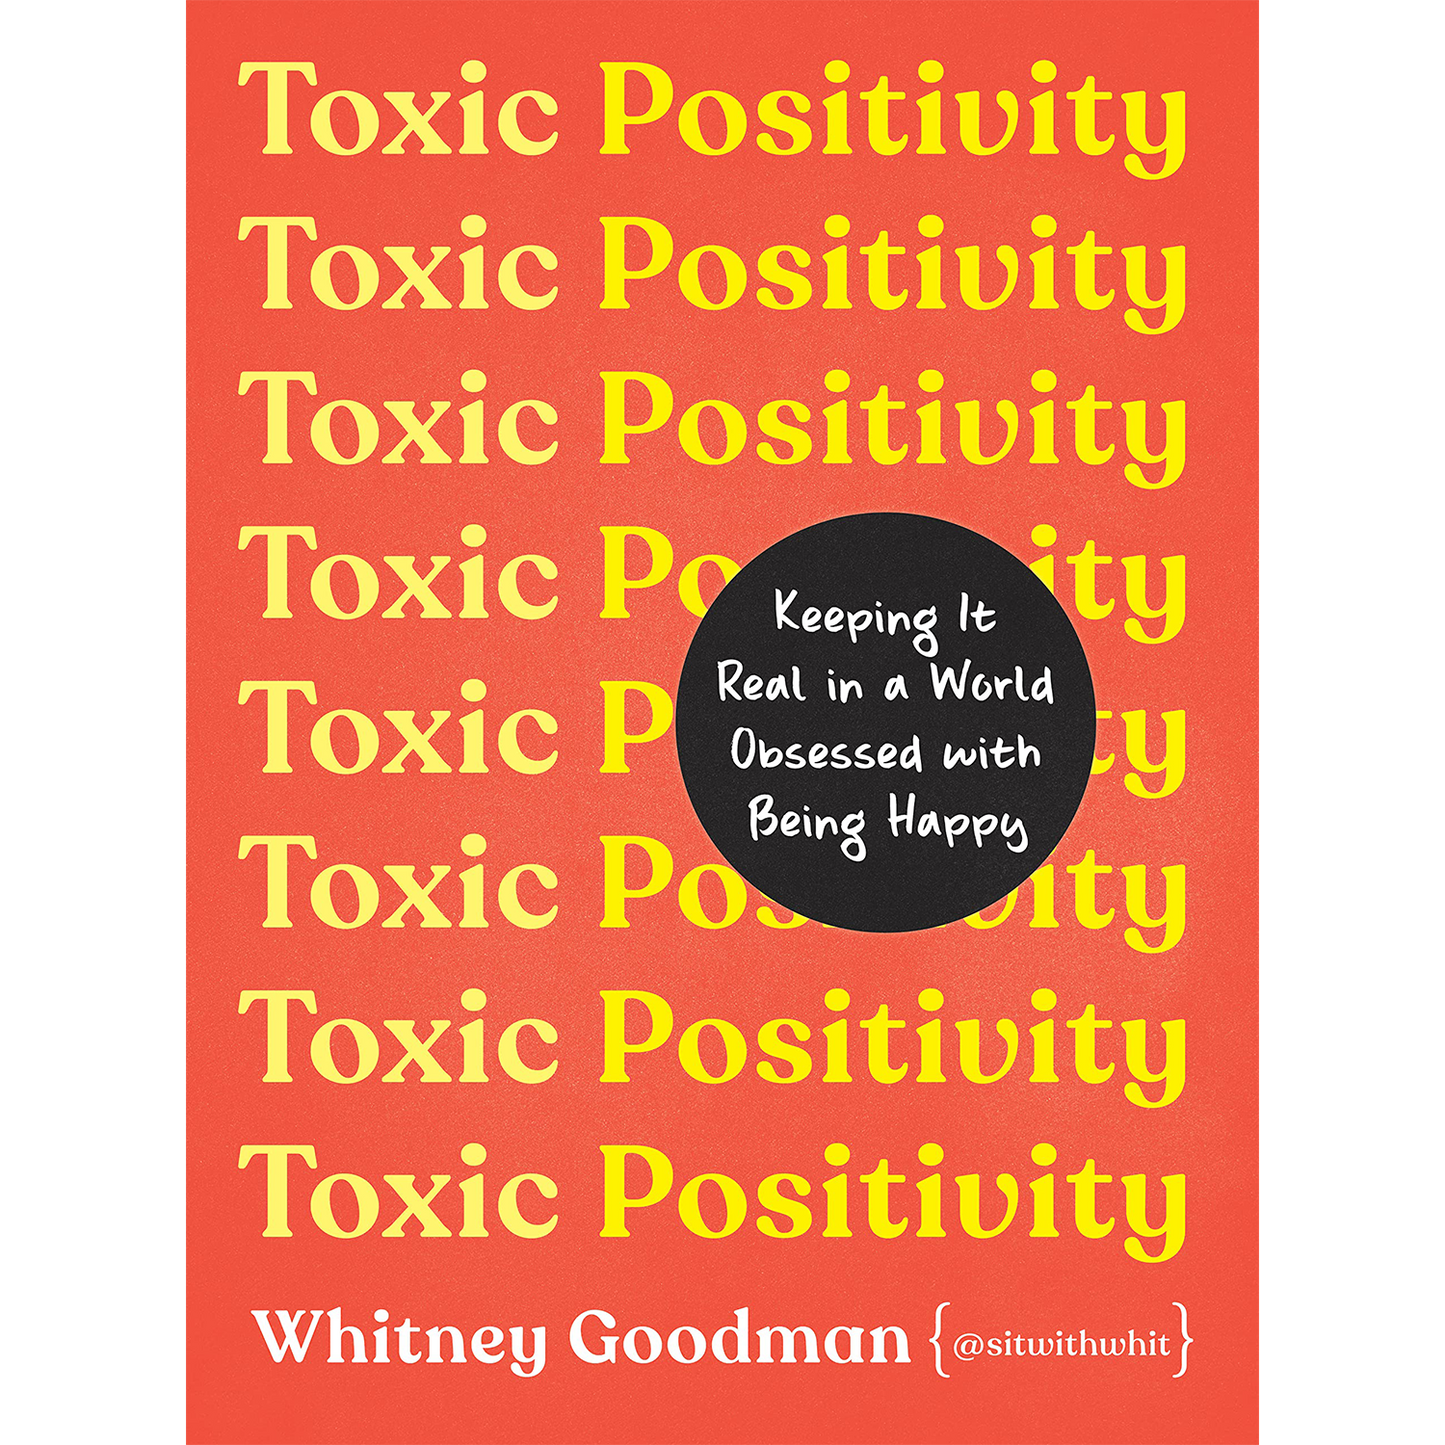 Toxic Positivity: Keeping It Real in a World Obsessed with Being Happy (Hardcover)